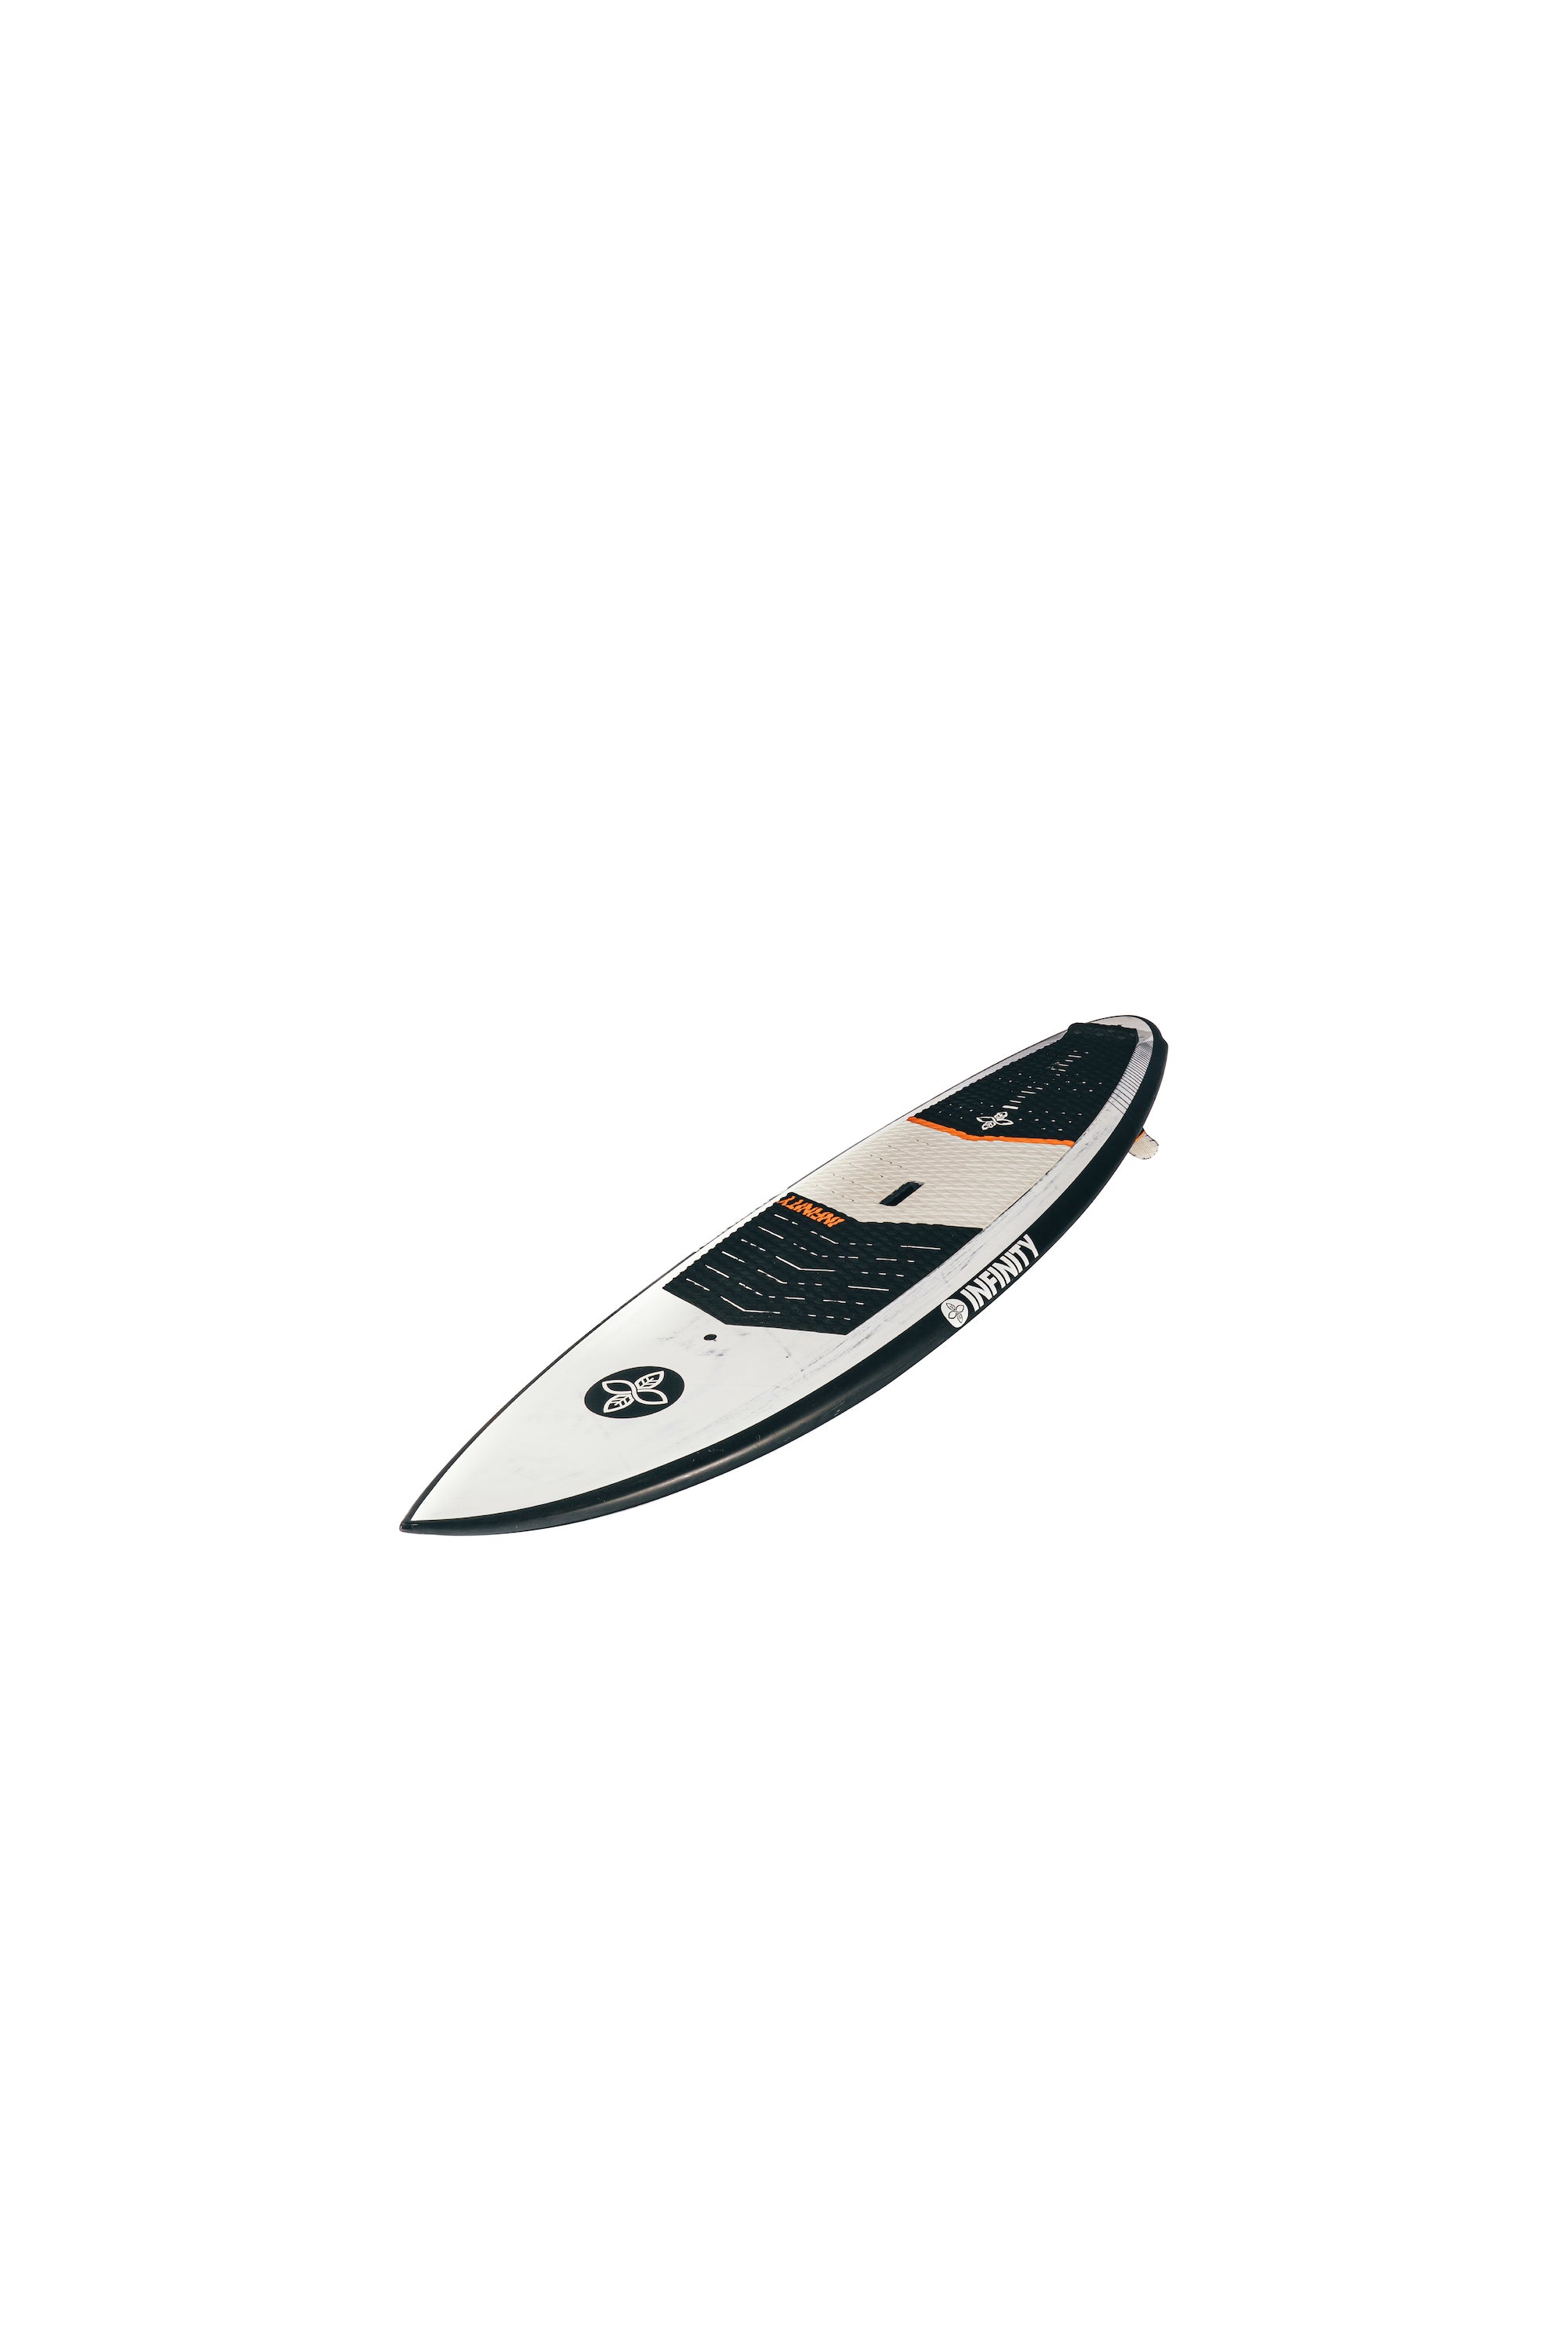 SUP – Shred & Speed